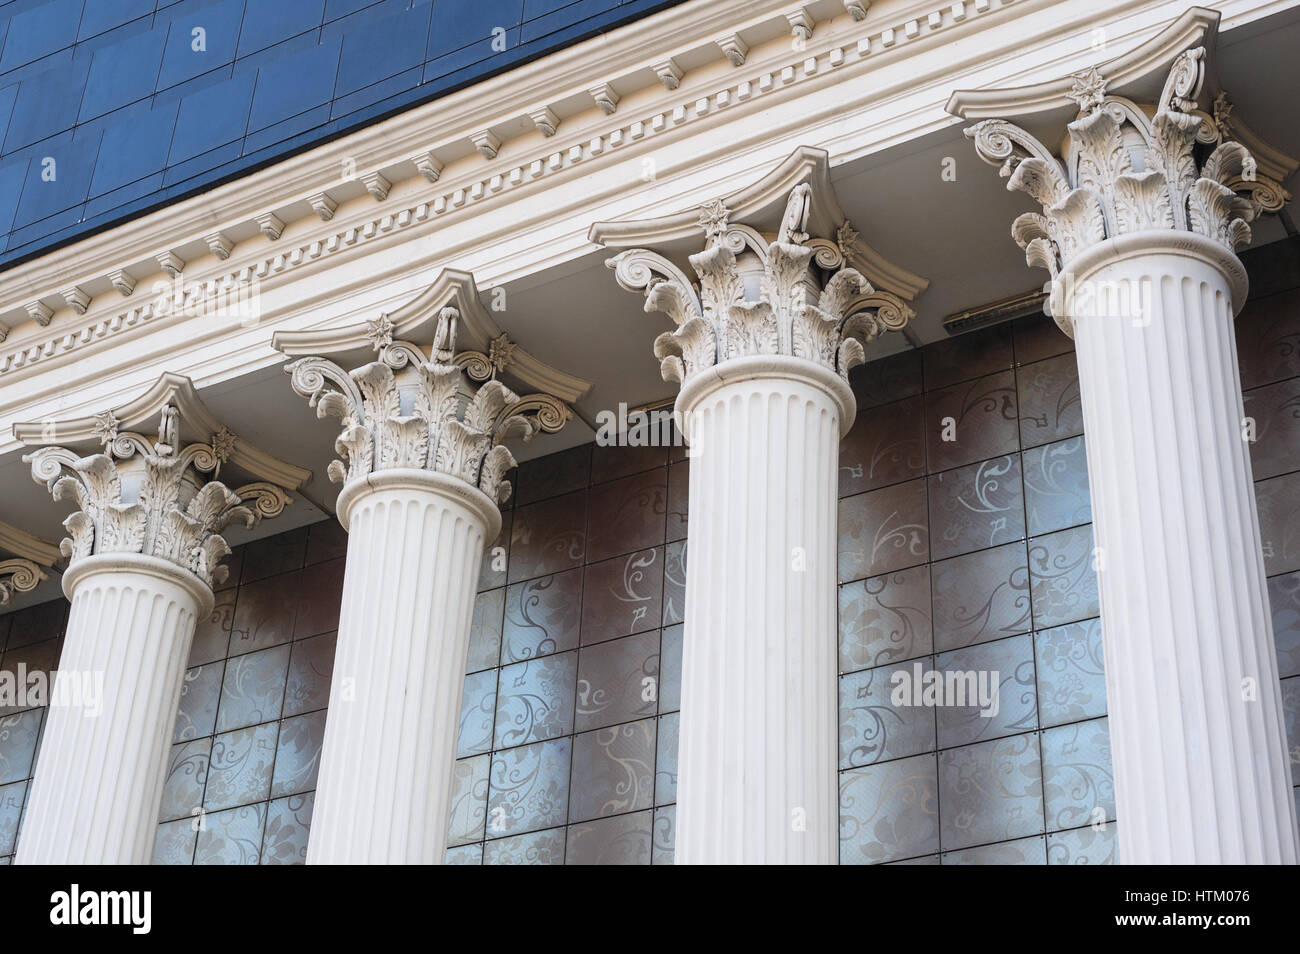 Architectural white Capital columns on the facade of the building. Stock Photo